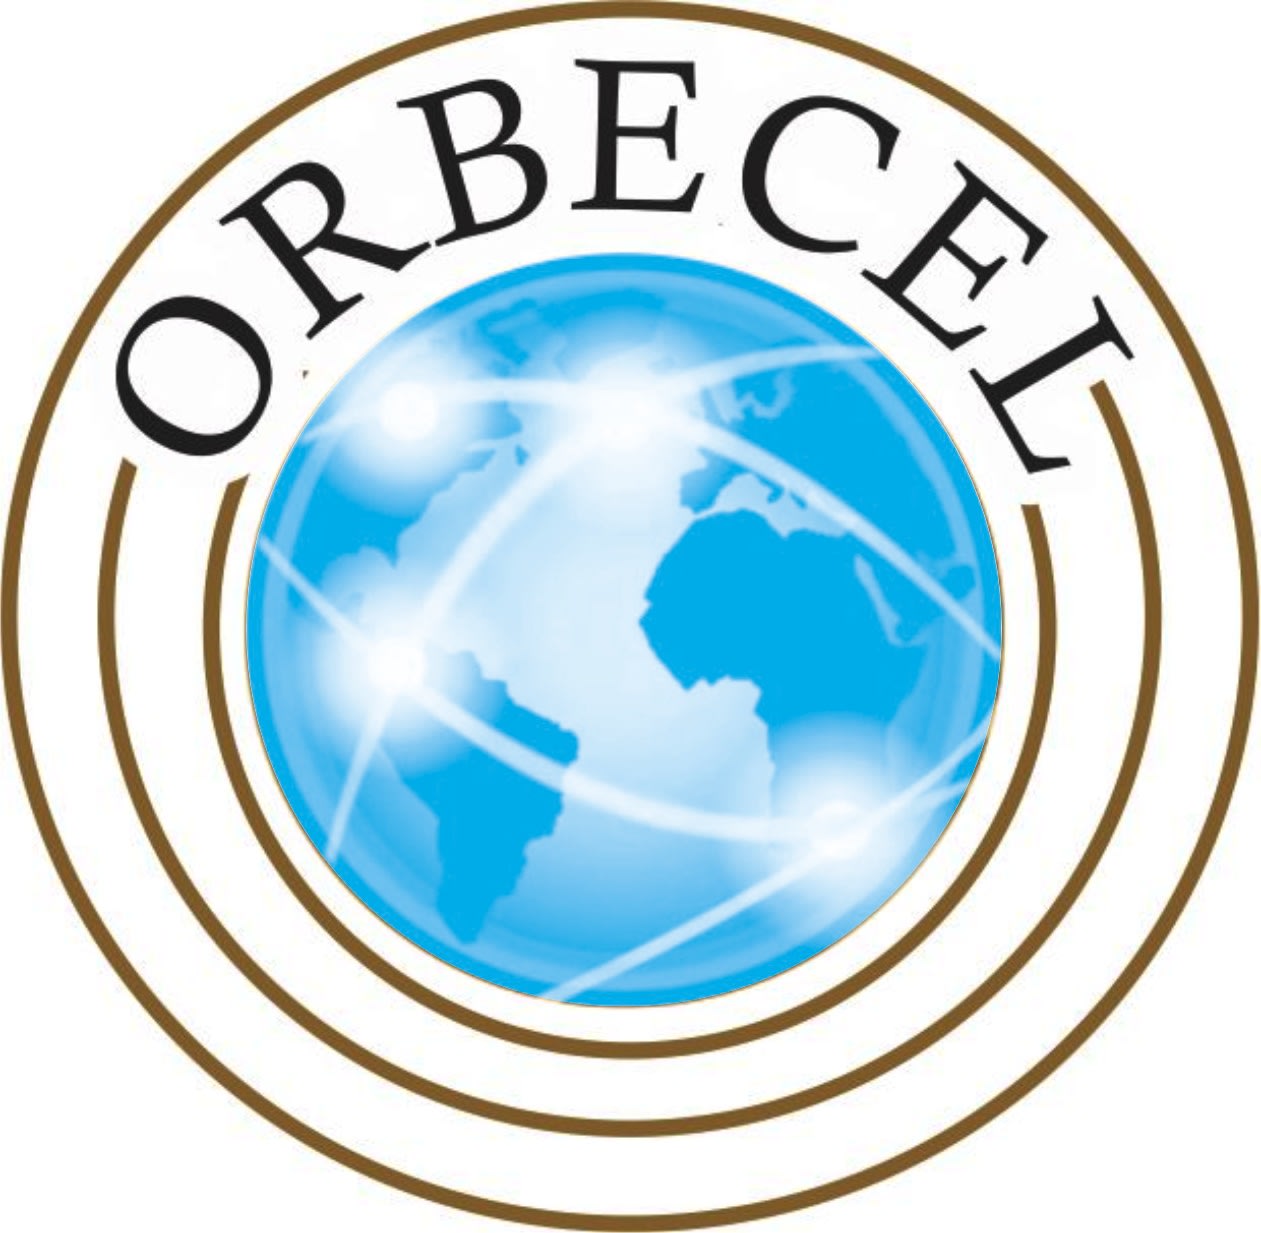 Orbecel